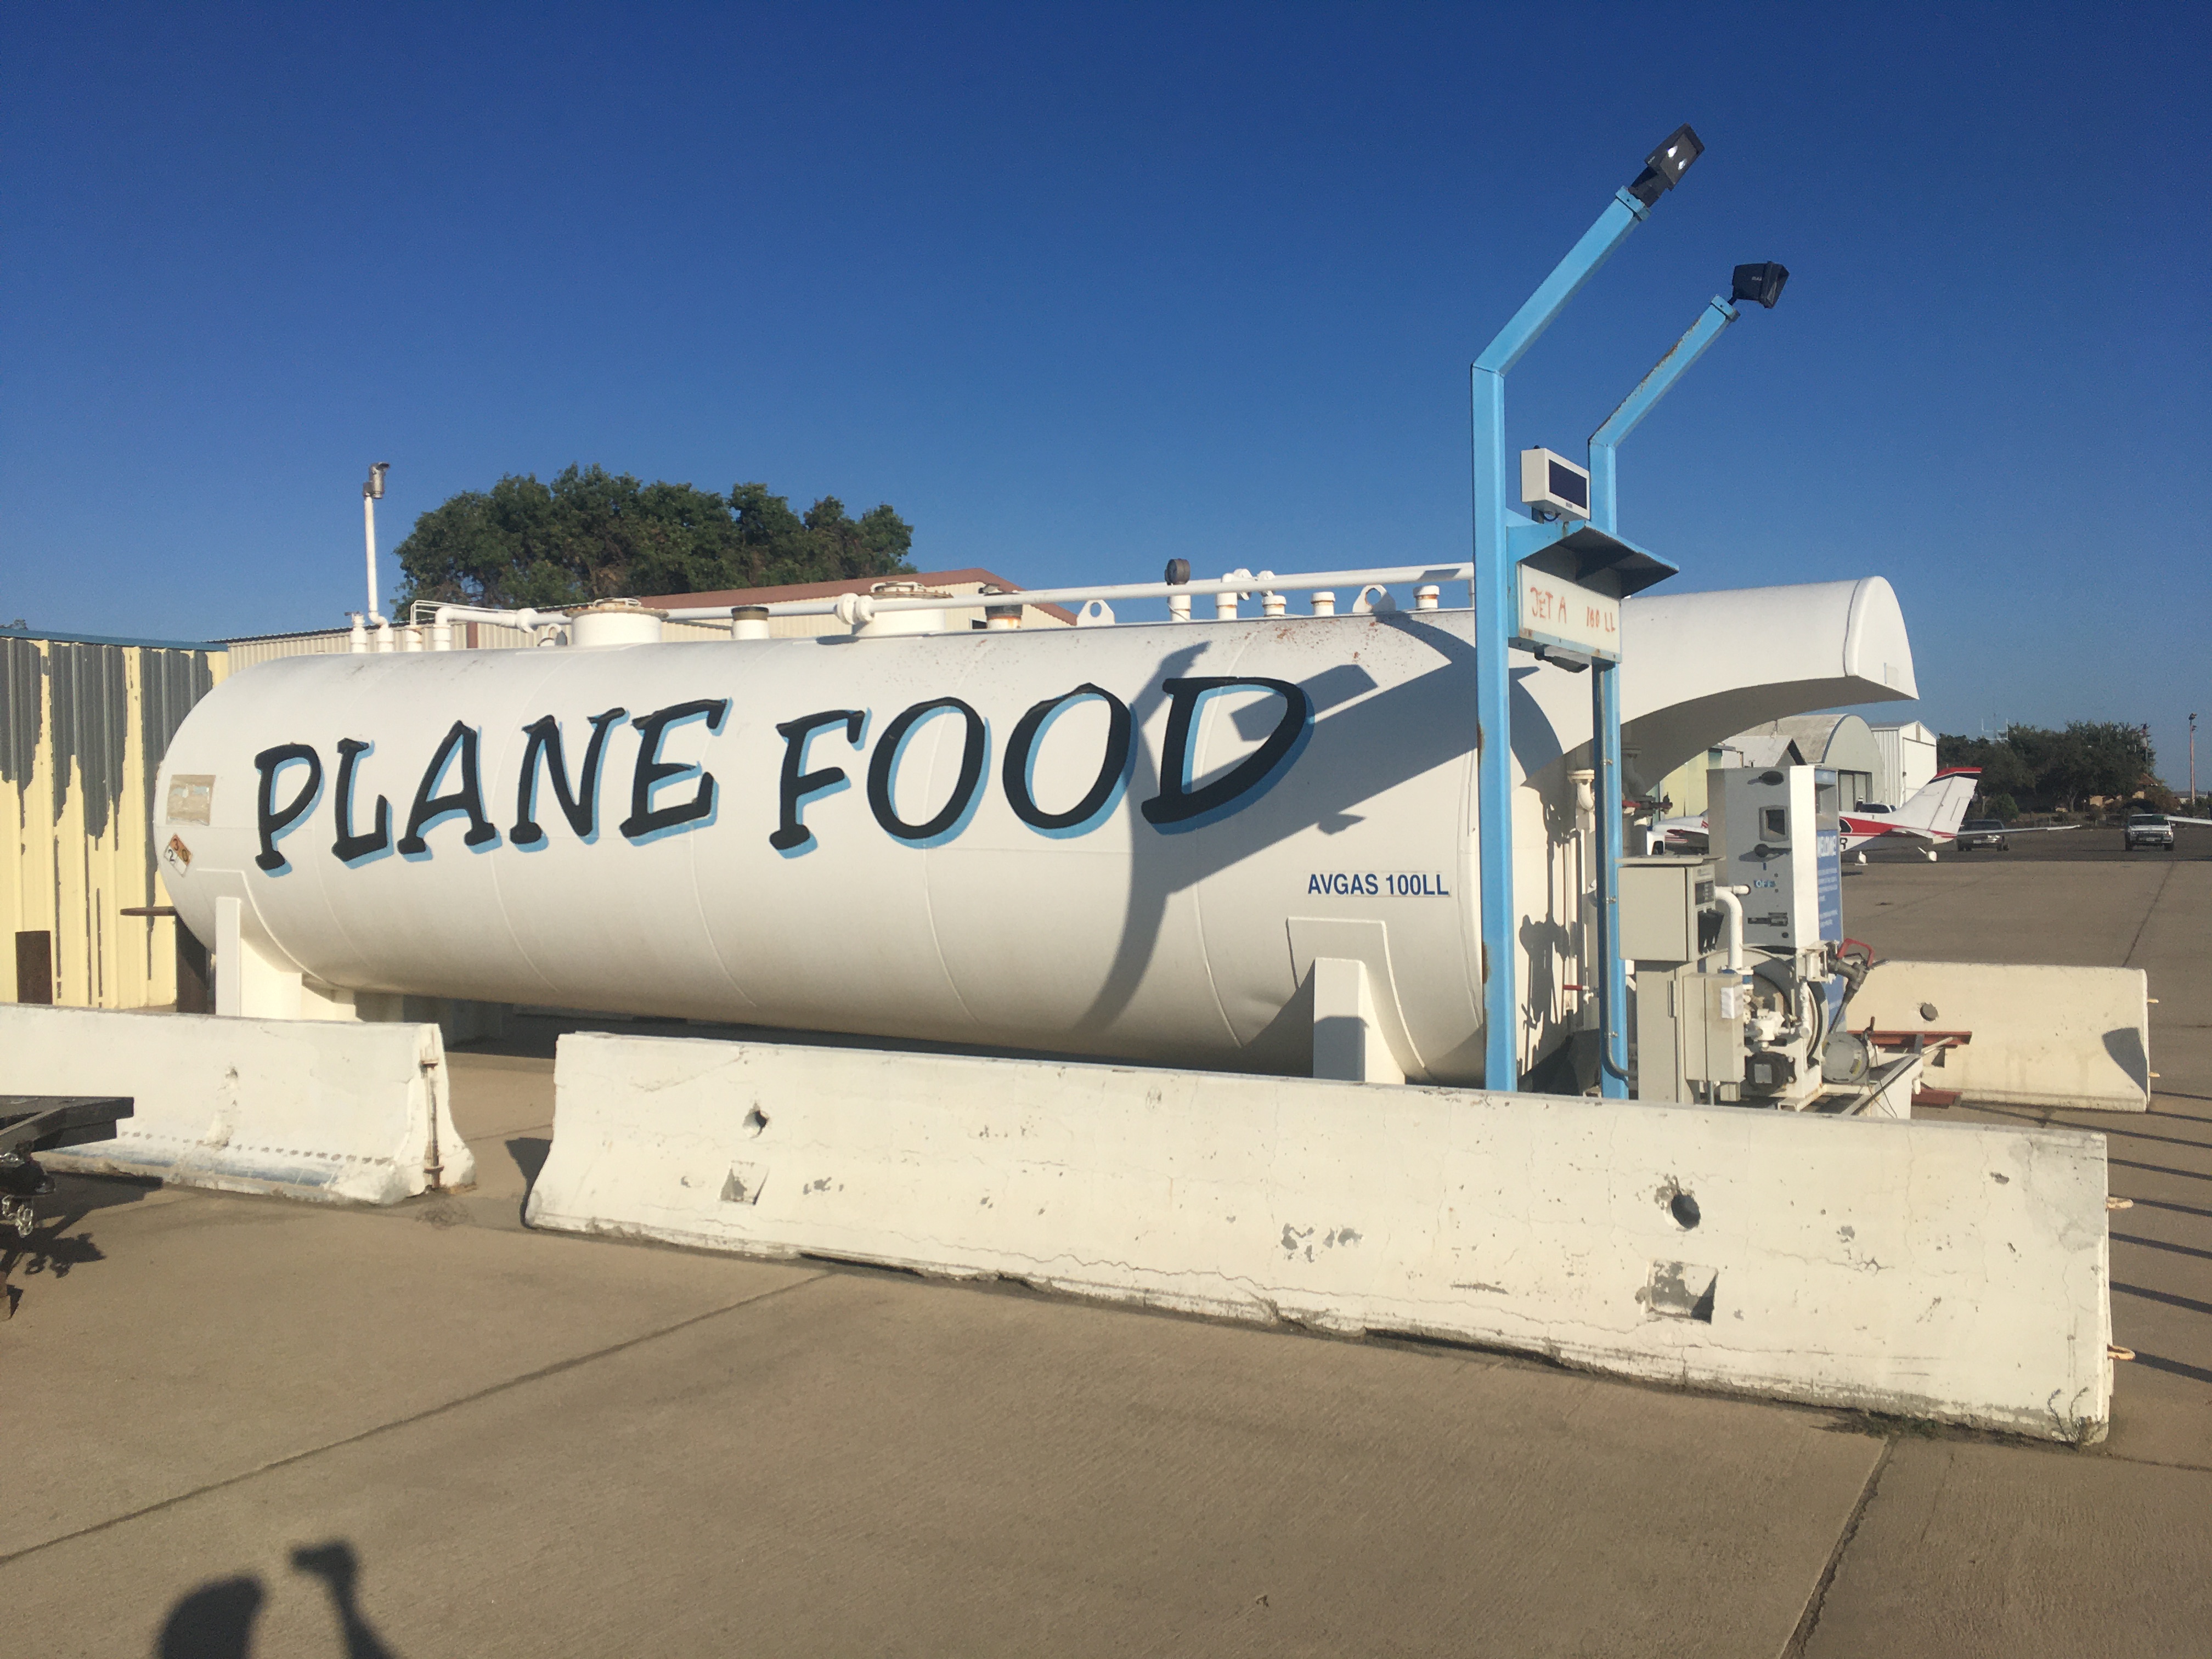 A large white tank for aviation fuel has a label in metre-high letters that says 'PLANE FOOD'